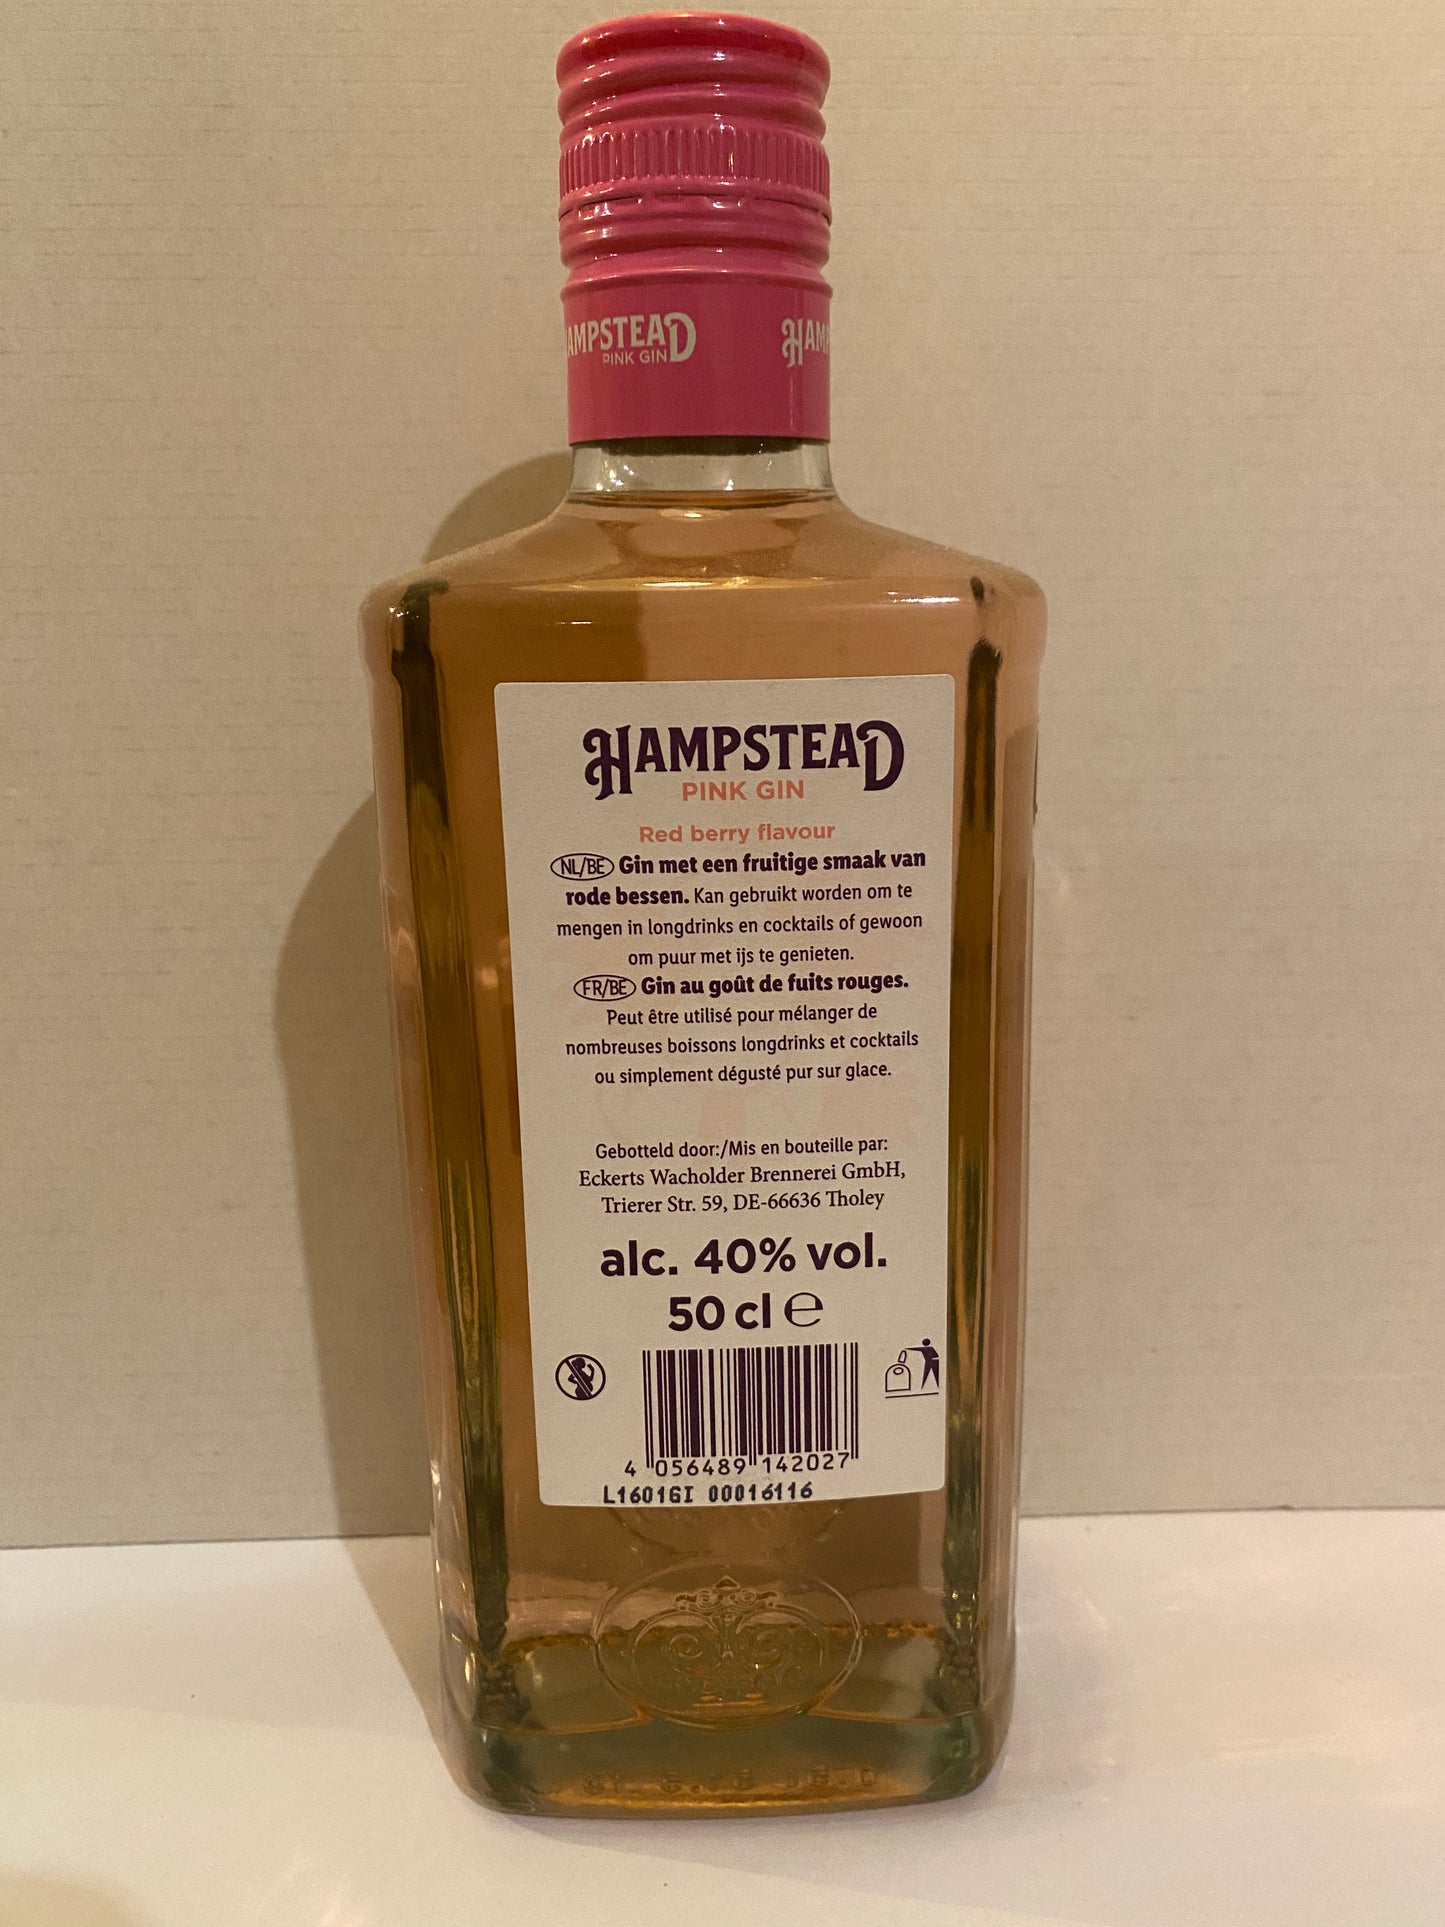 Hampstead Pink Gin – of House Gin